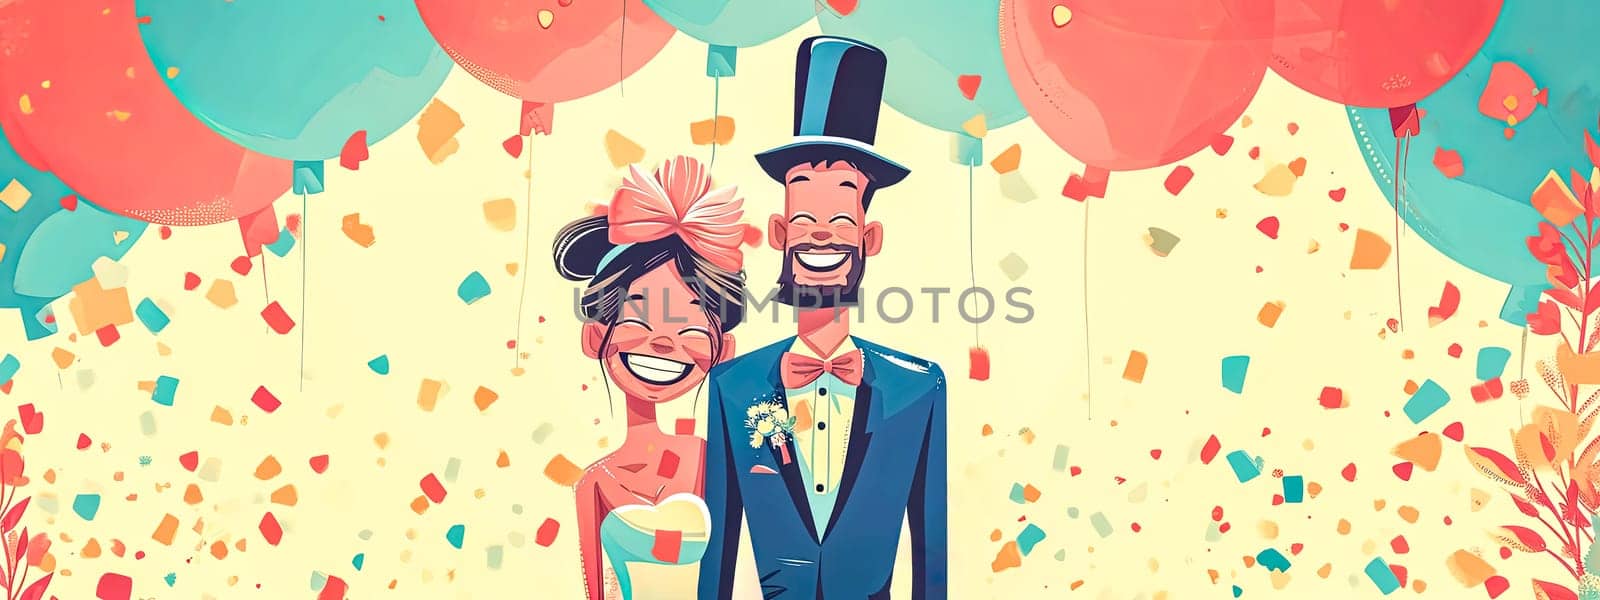 retro wedding card. A joyous illustration of a newlywed couple with oversized heads, surrounded by colorful balloons and confetti, perfect for a wedding celebration banner. by Edophoto